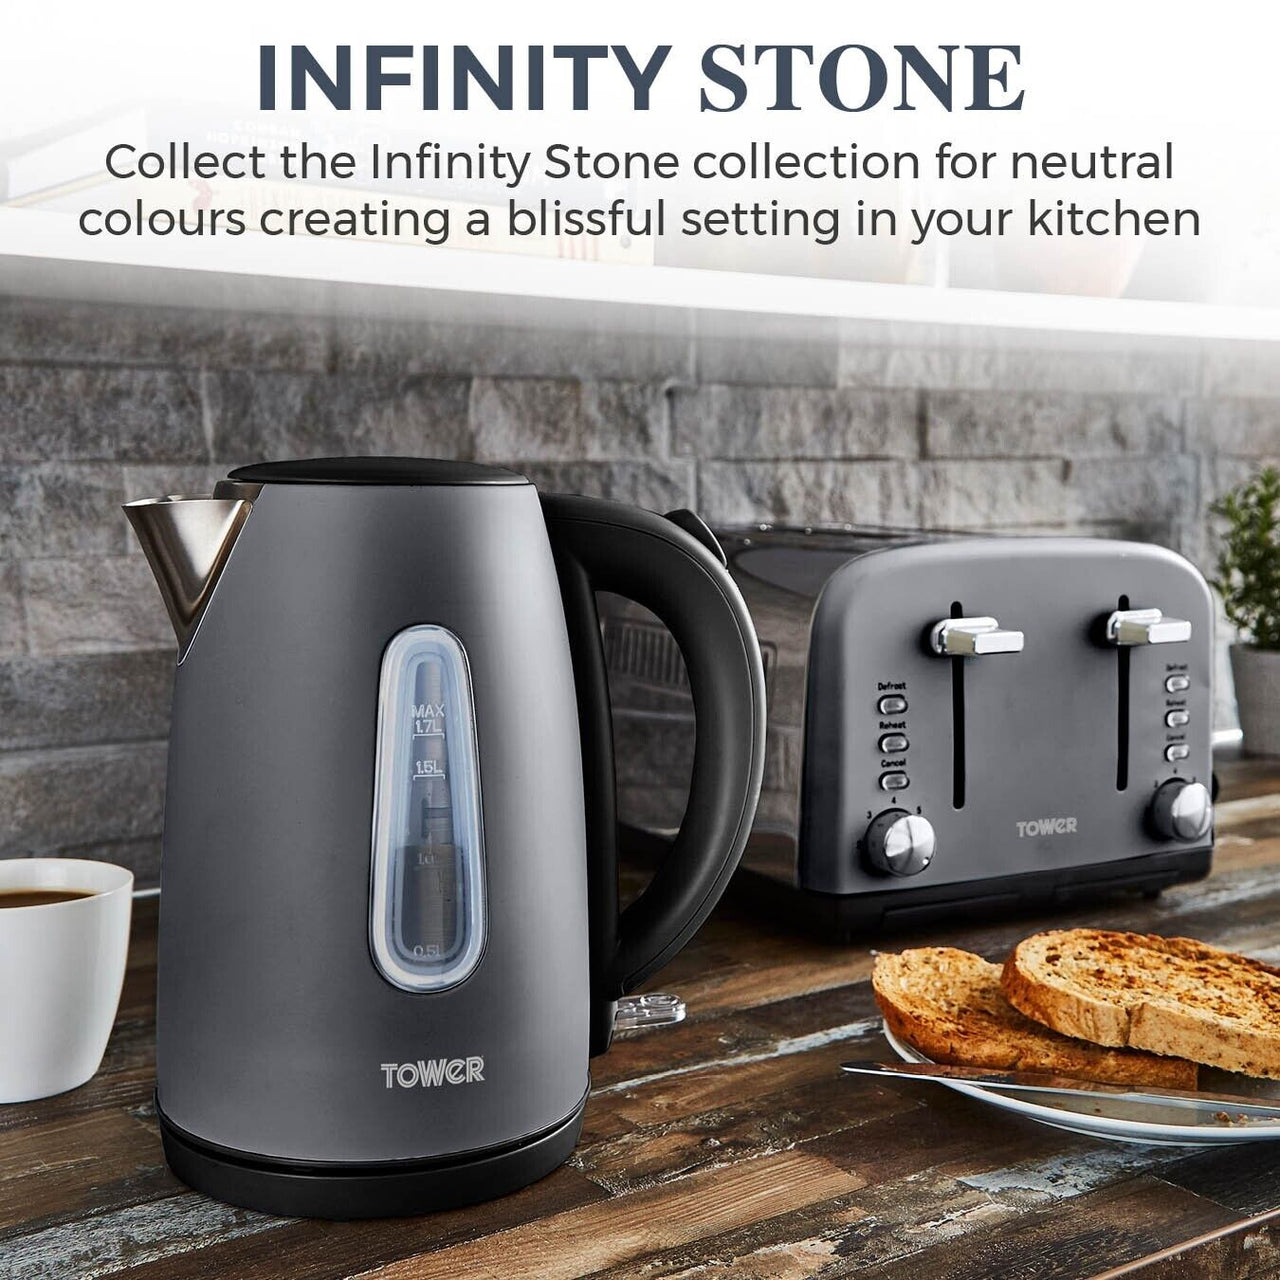 Tower Infinity Kettle 4 Slice Toaster & 3 Canisters Kitchen Set in Slate Grey